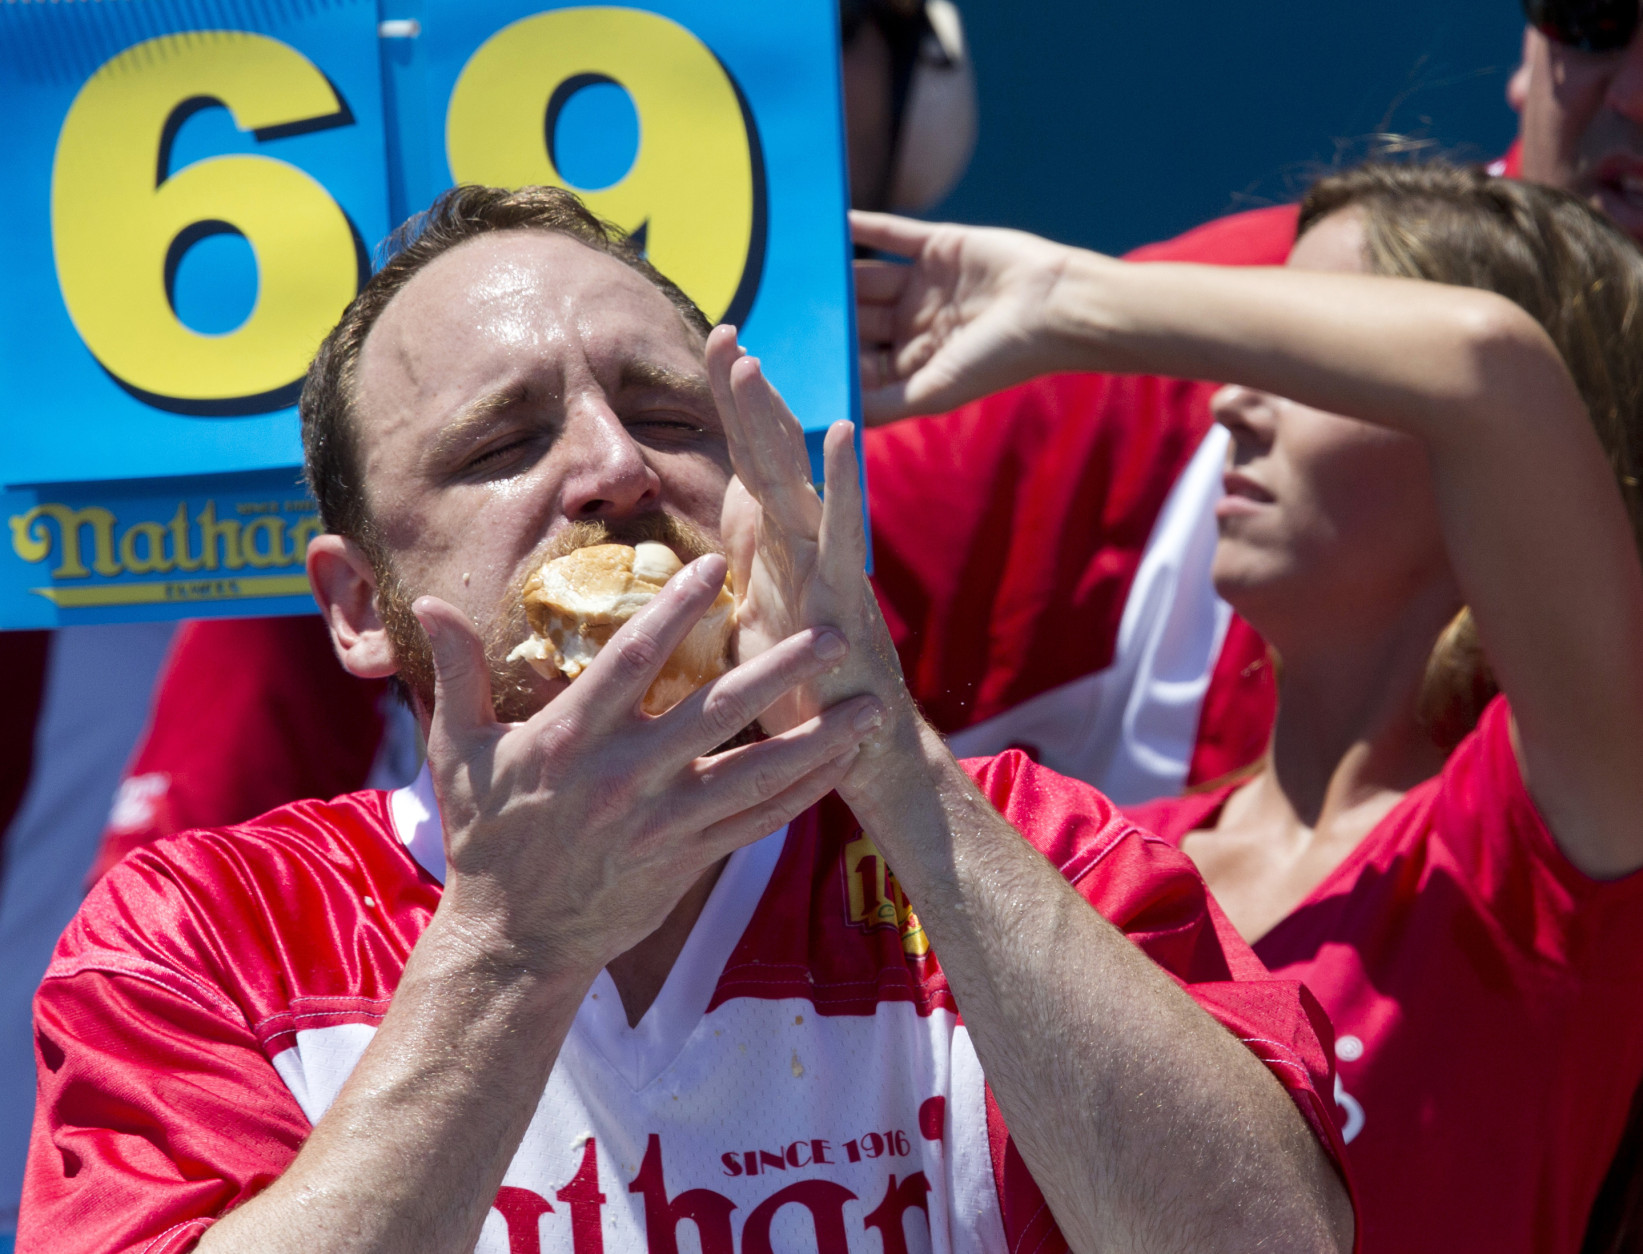 Joey Chestnut competes in Nathan's Famous Fourth of July International Hot Dog Eating Contest men's competition, Monday, July 4, 2016, in New York. Chestnut came in first eating 70 hot dogs and buns in 10 minutes. (AP Photo/Mary Altaffer)